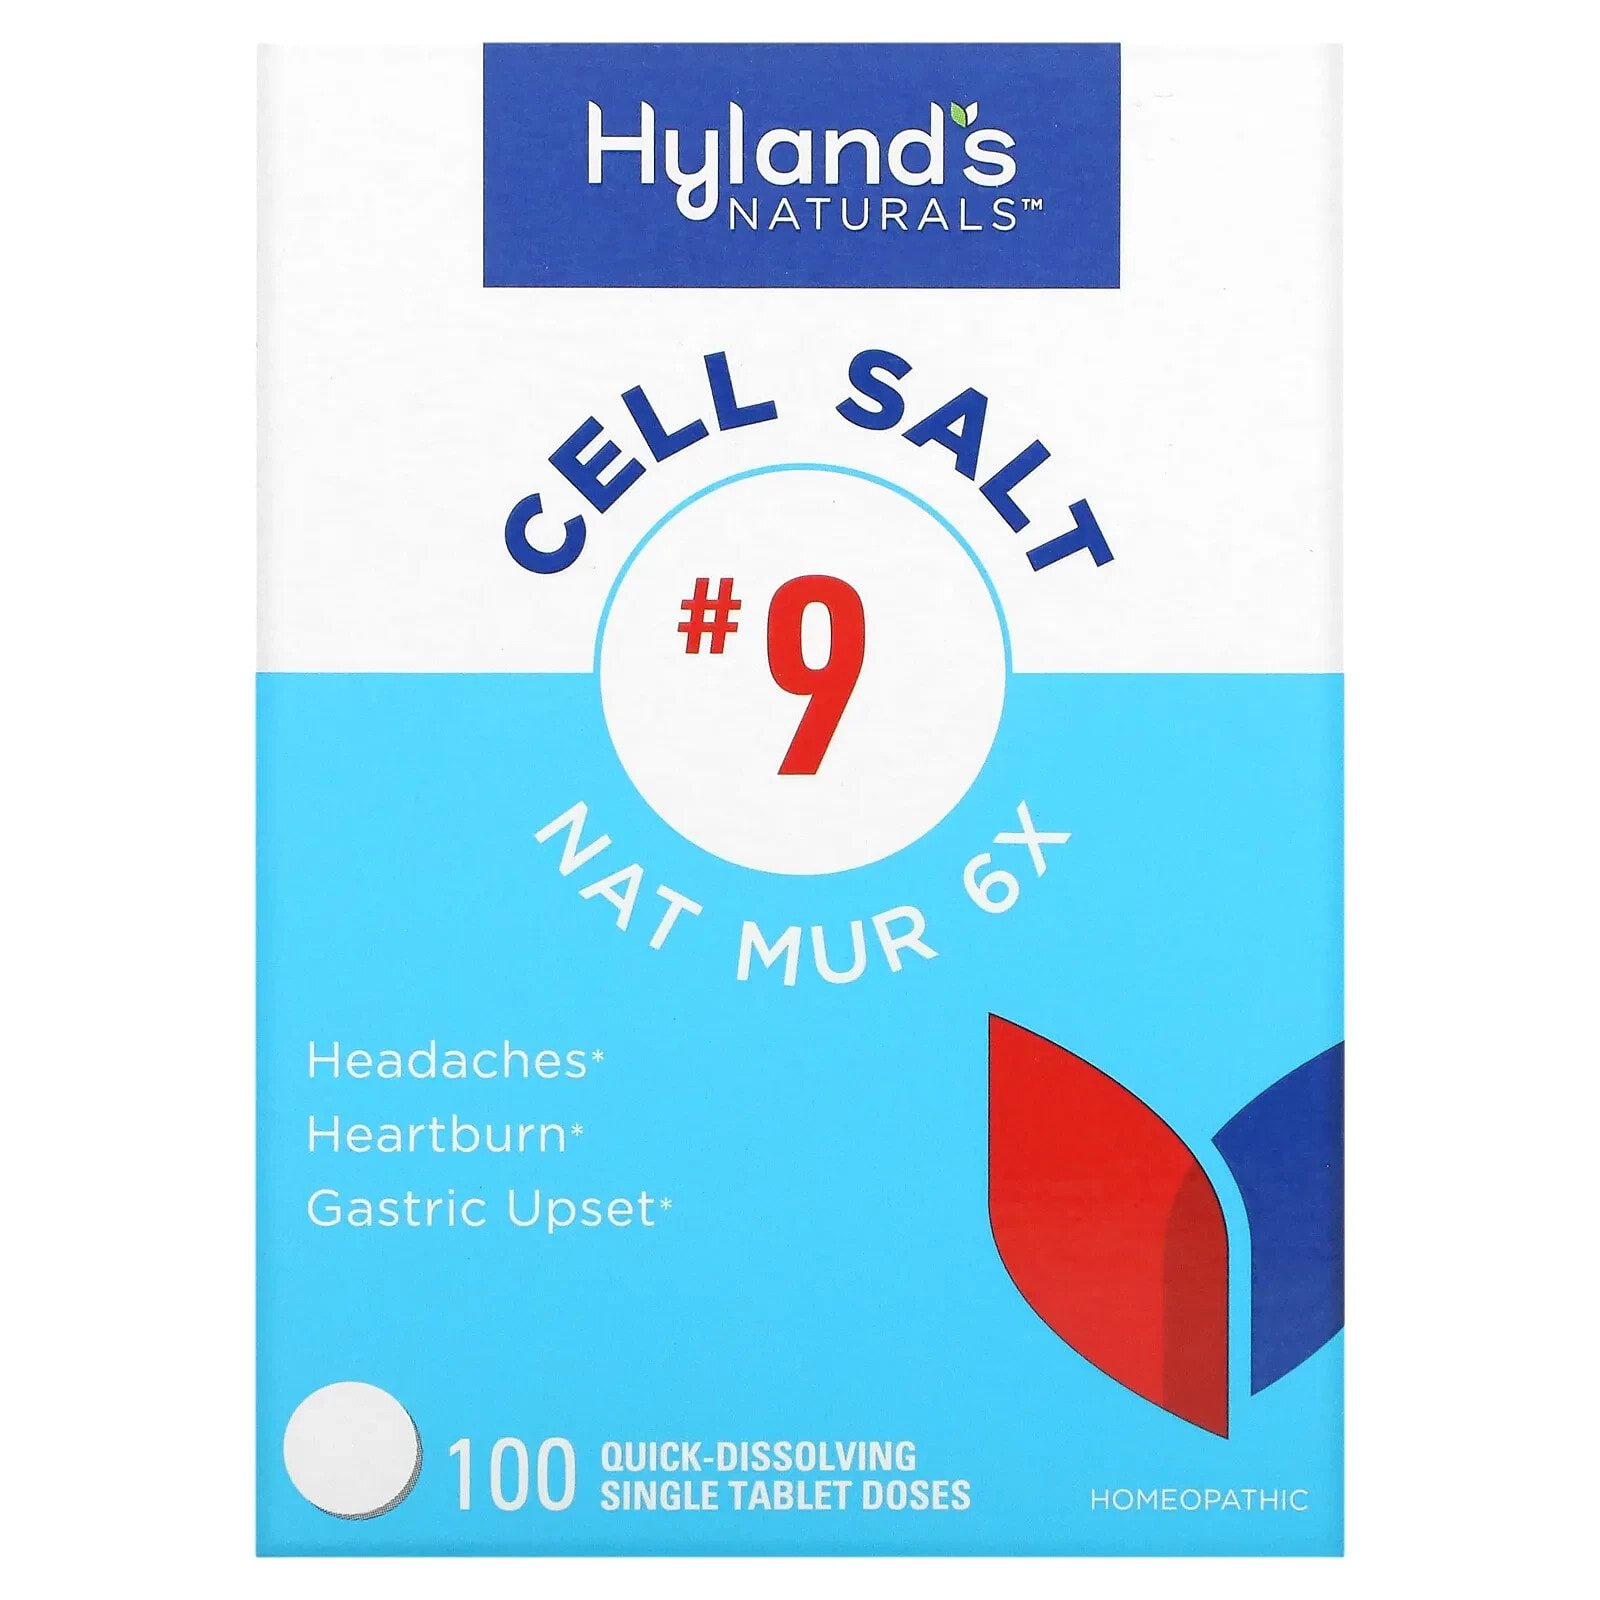 Hyland's, Cell Salt #9, 100 Quick-Dissolving Single Tablet Doses